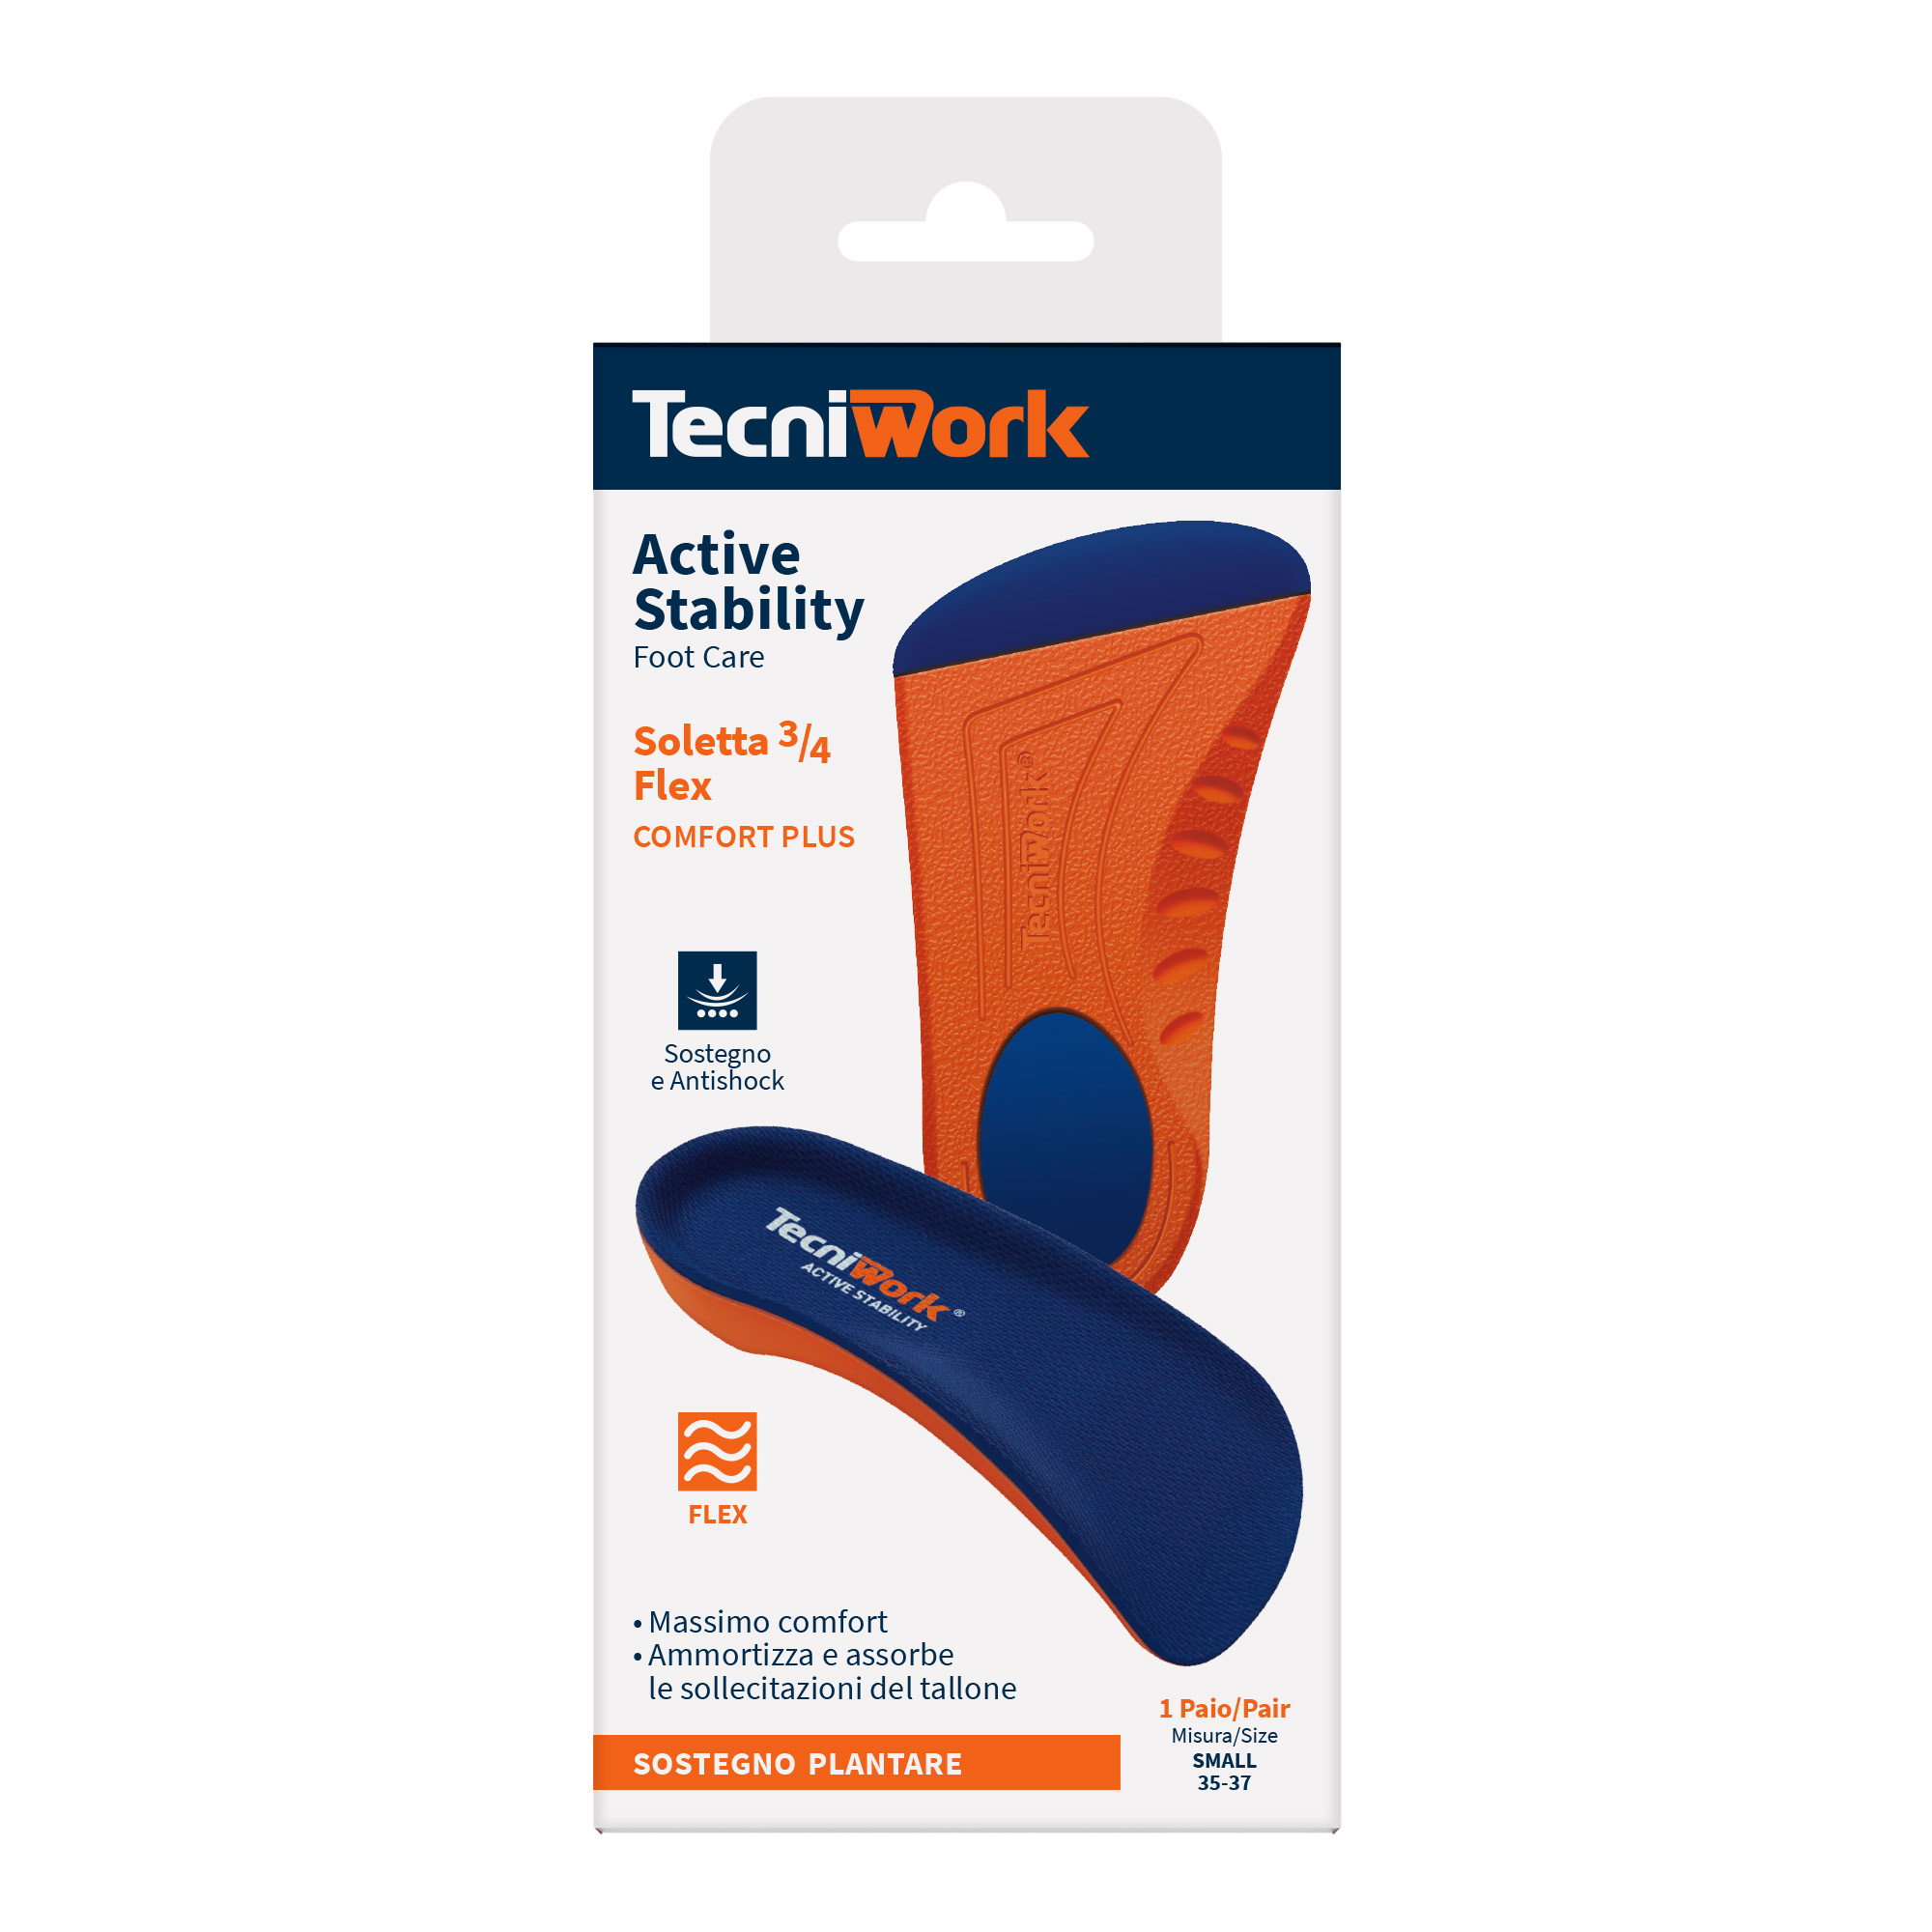 ¾ Flex insoles without insert